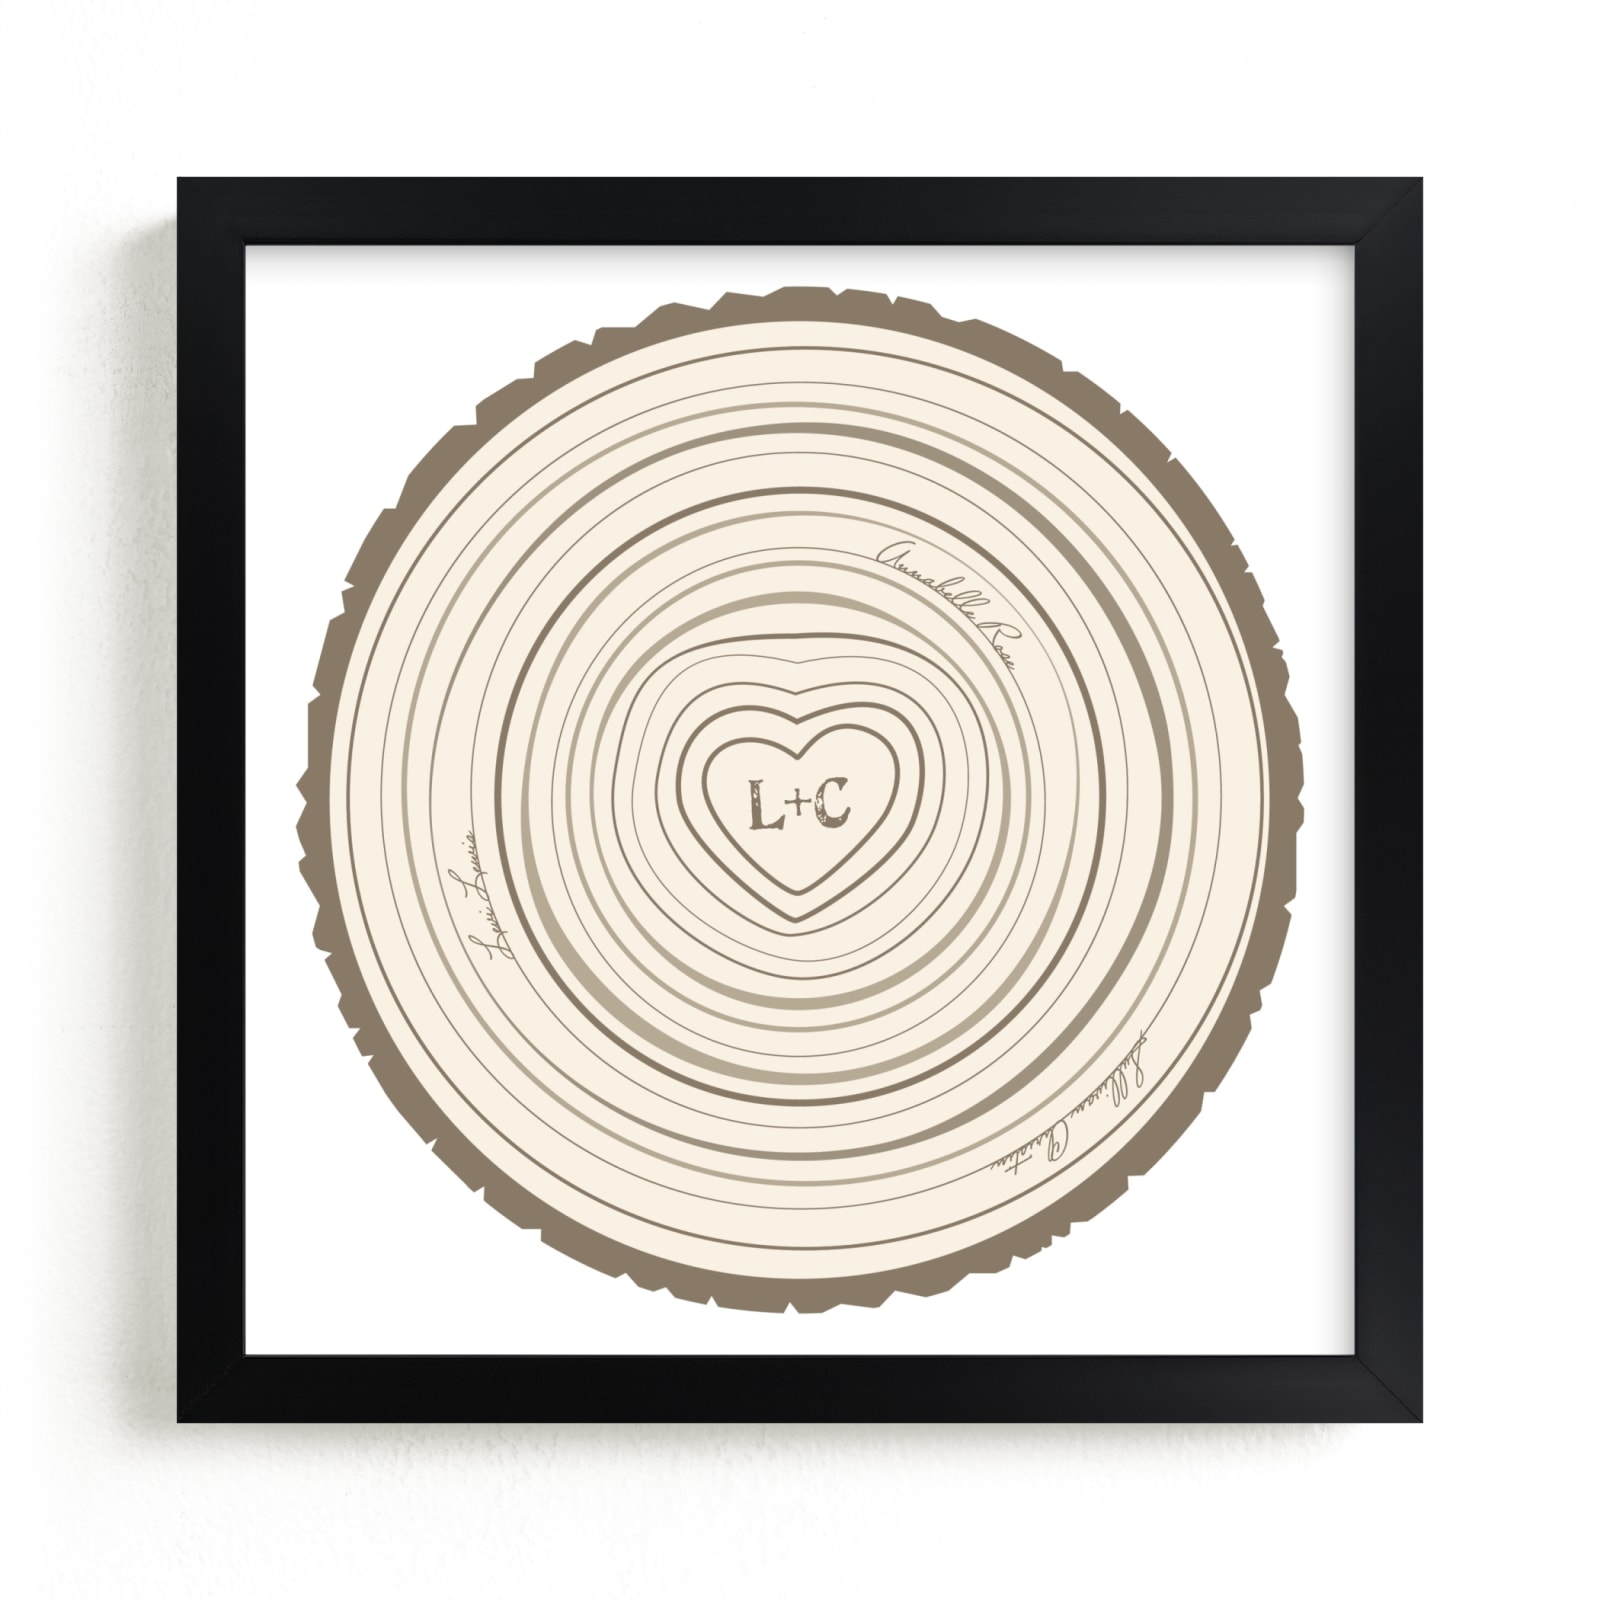 This is a brown nursery wall art by Jessie Steury called Family Tree Rings.